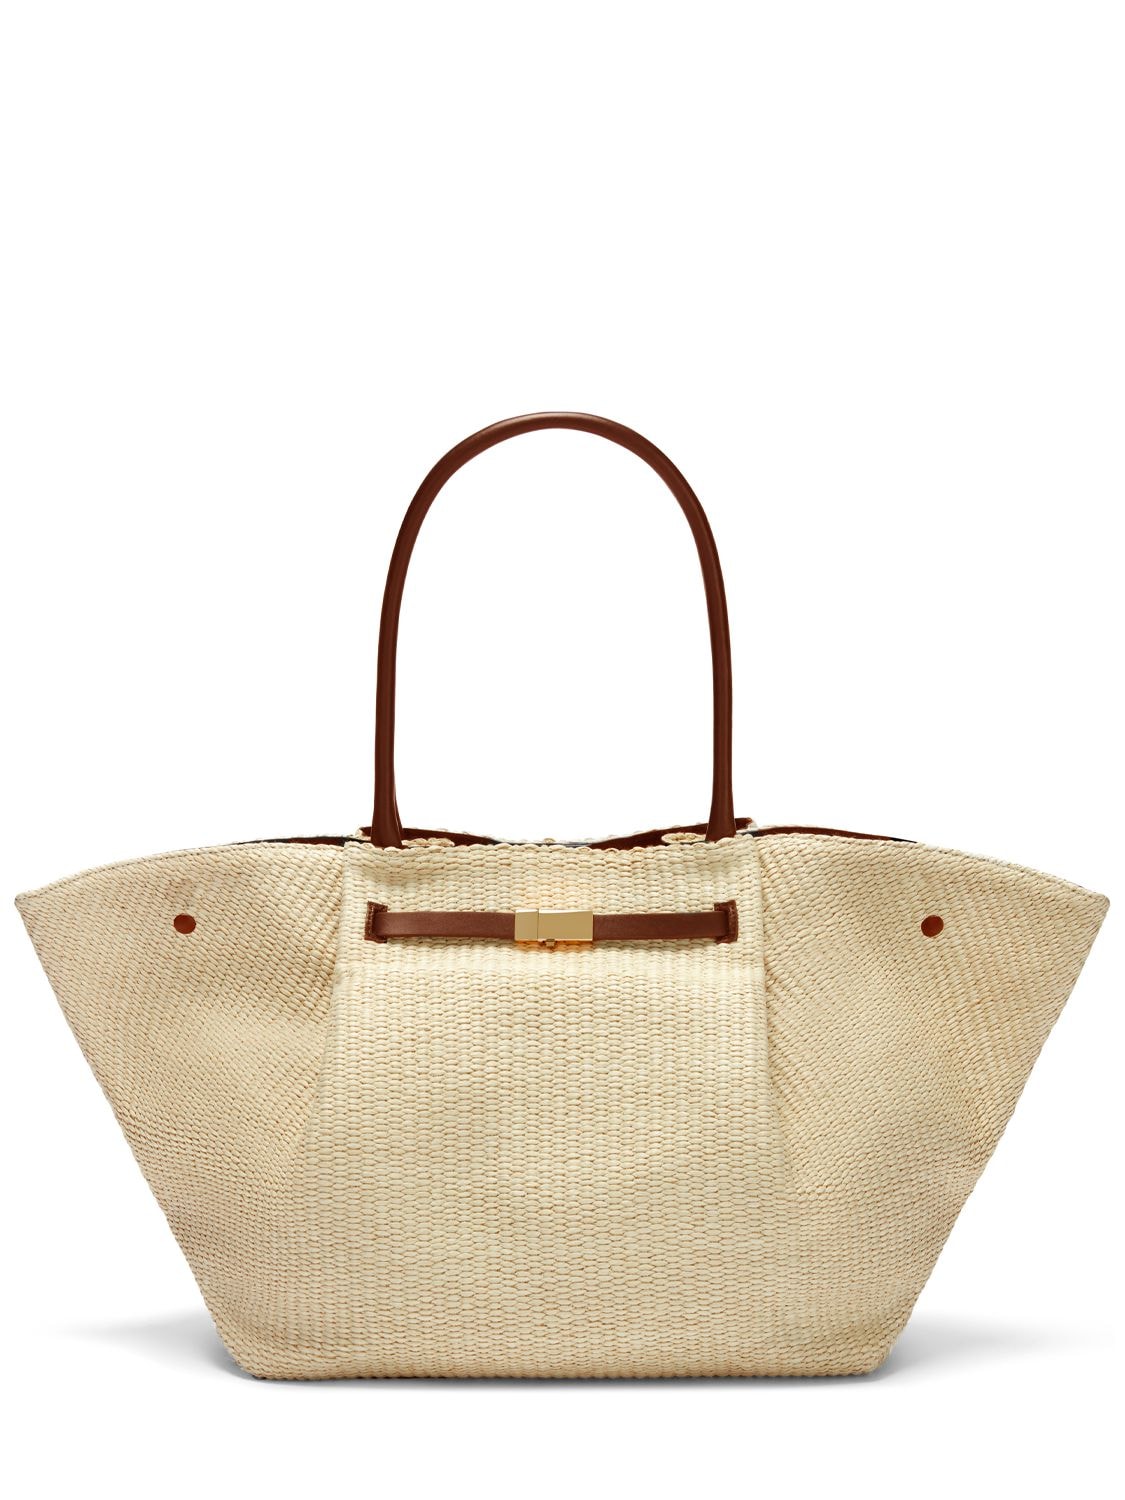 Demellier New York Raffia & Leather Tote Bag In Natural Tan | ModeSens